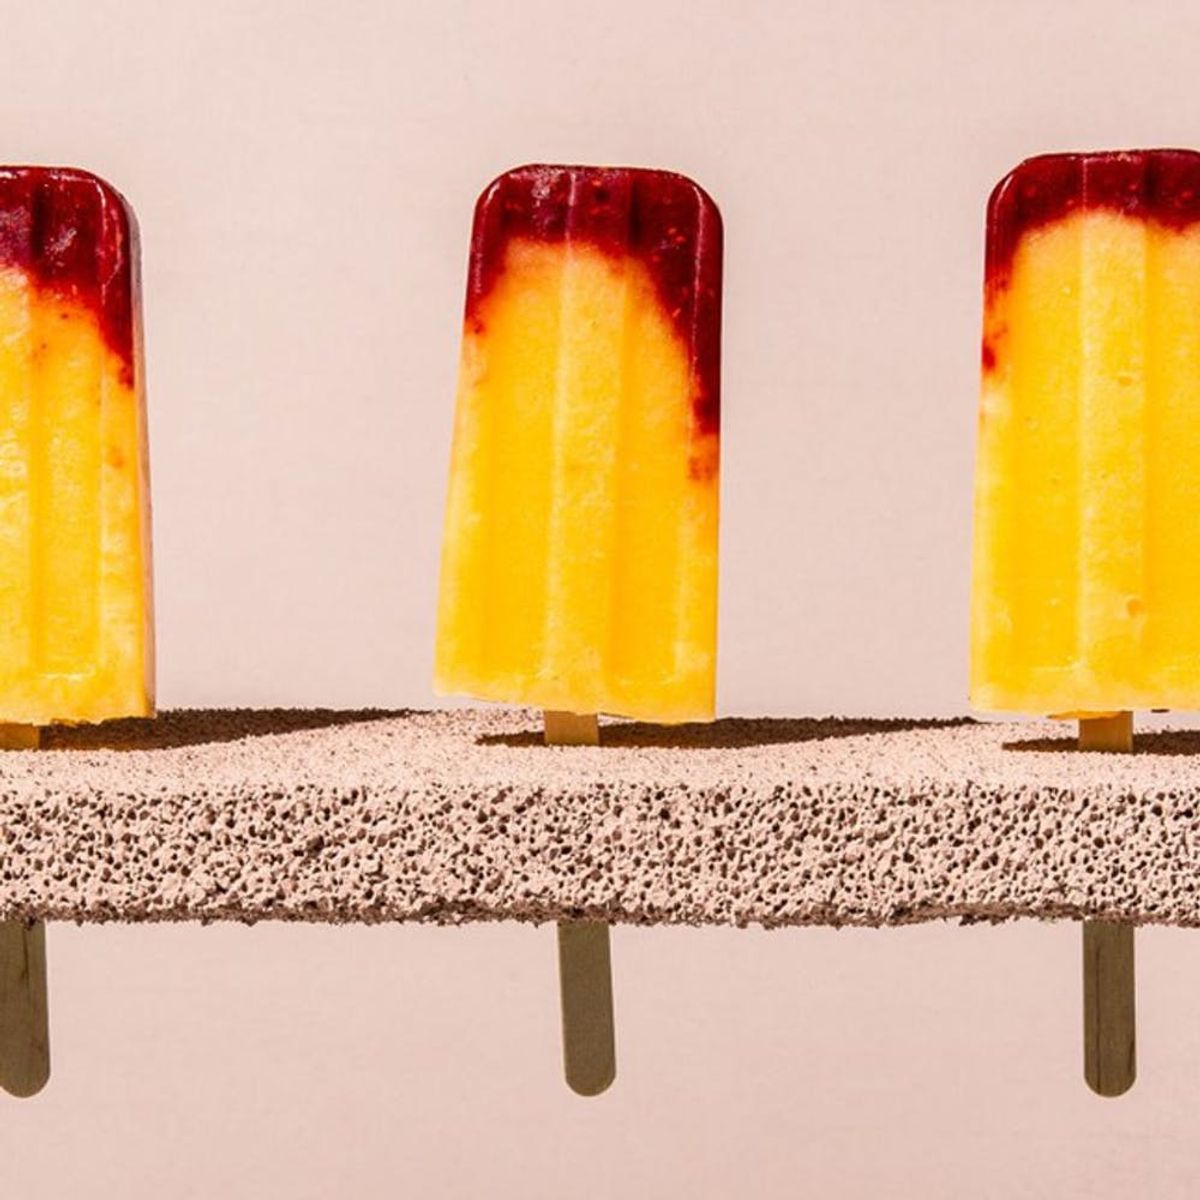 15 Popsicle Recipes That Will Make You Melt